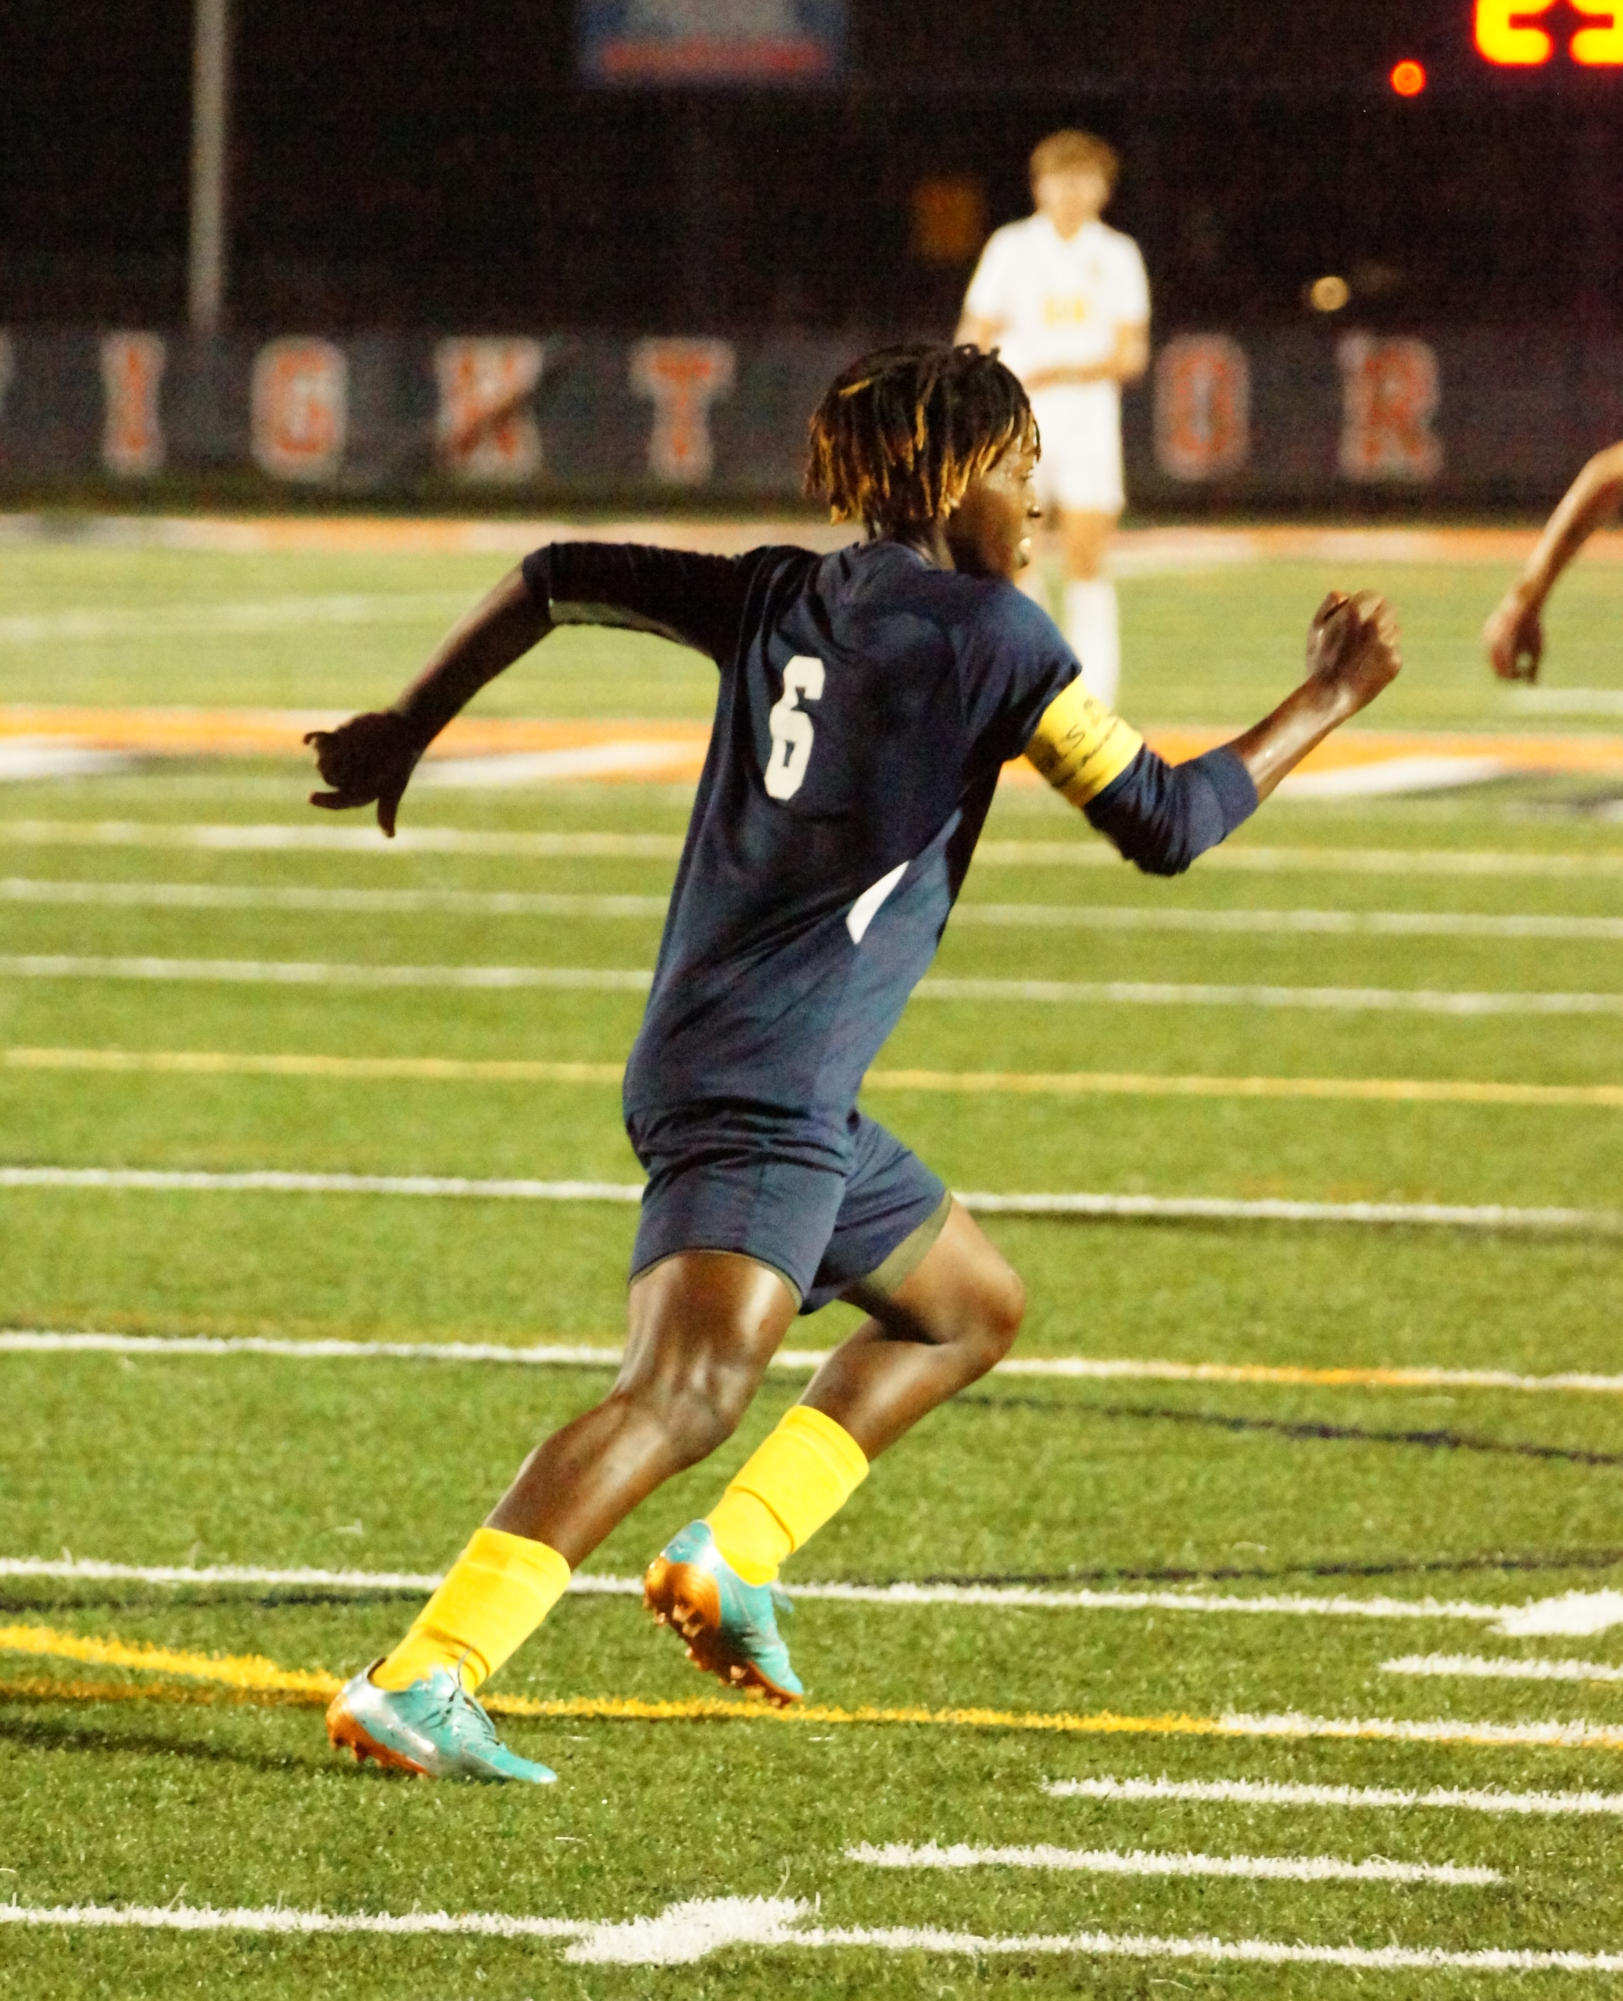 Against New Trier on Thursday night, Evanston allowed more goals than it had in its last four games combined.